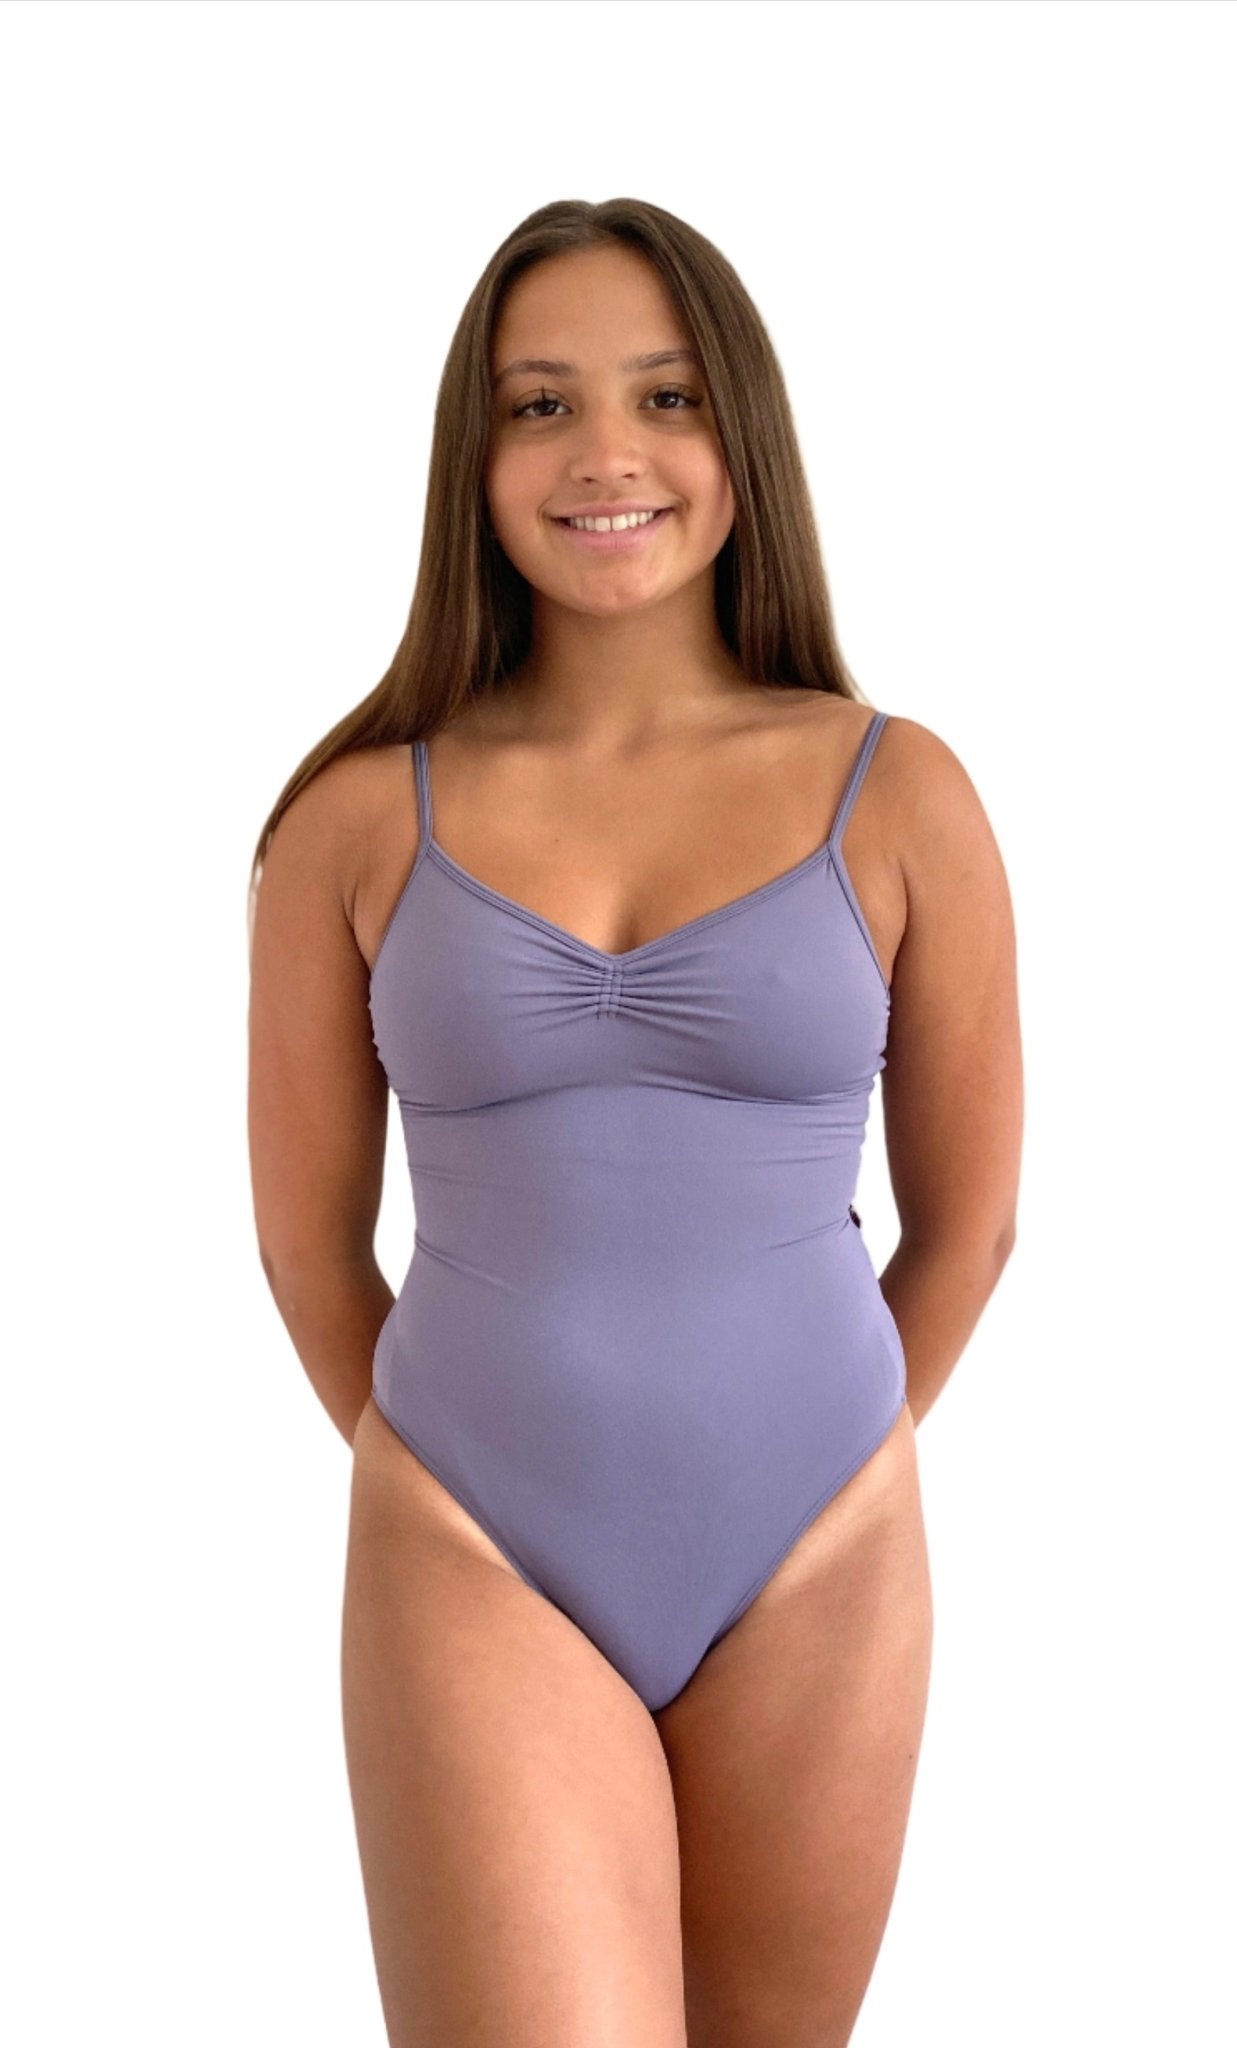 Camisole Leotard with Lace PlumThe Classic Camisole Leotard with Lace Bow Back - Light Plum#mLeotardTHE COLLECTIVE DANCEWEAR